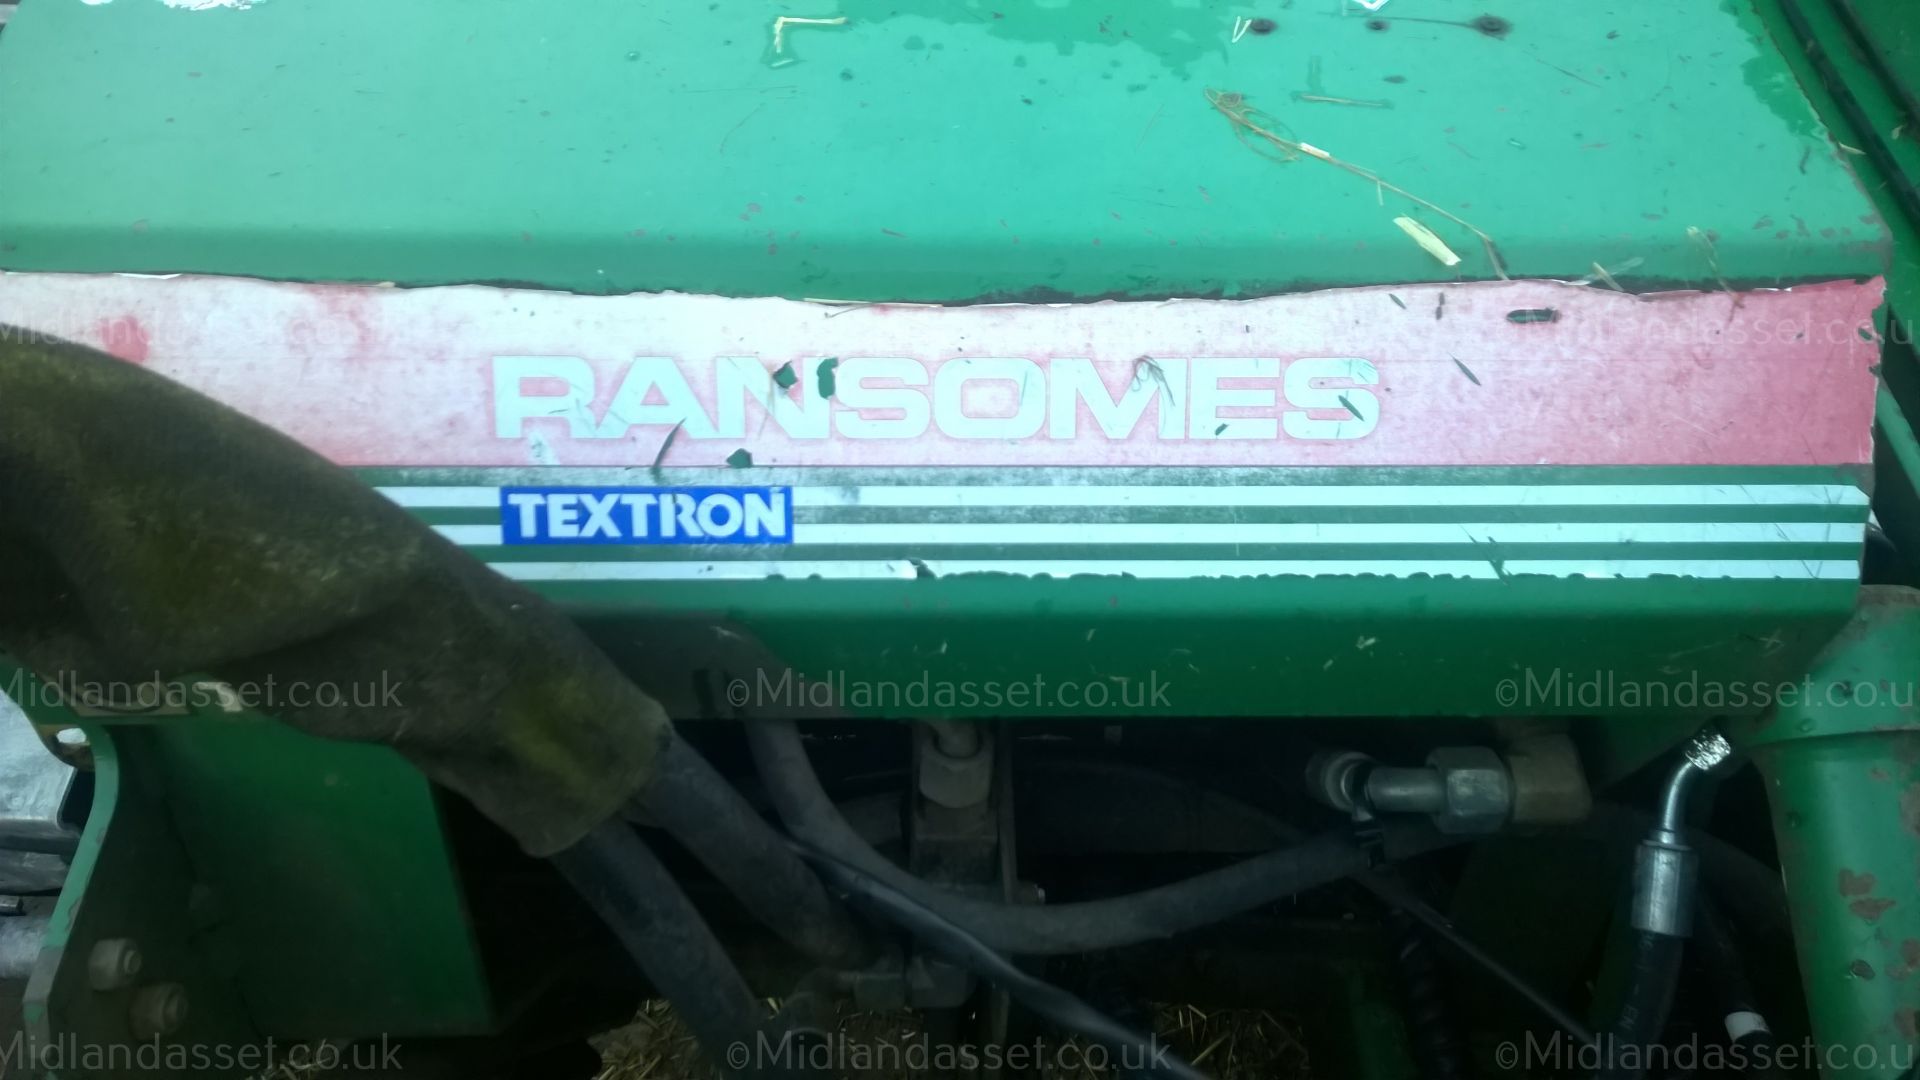 DS - RANSOMES TEXTRON TG 4650 GANG MOWER   EX COUNCIL GOOD WORKING ORDER COLLECTION FROM - Image 6 of 8